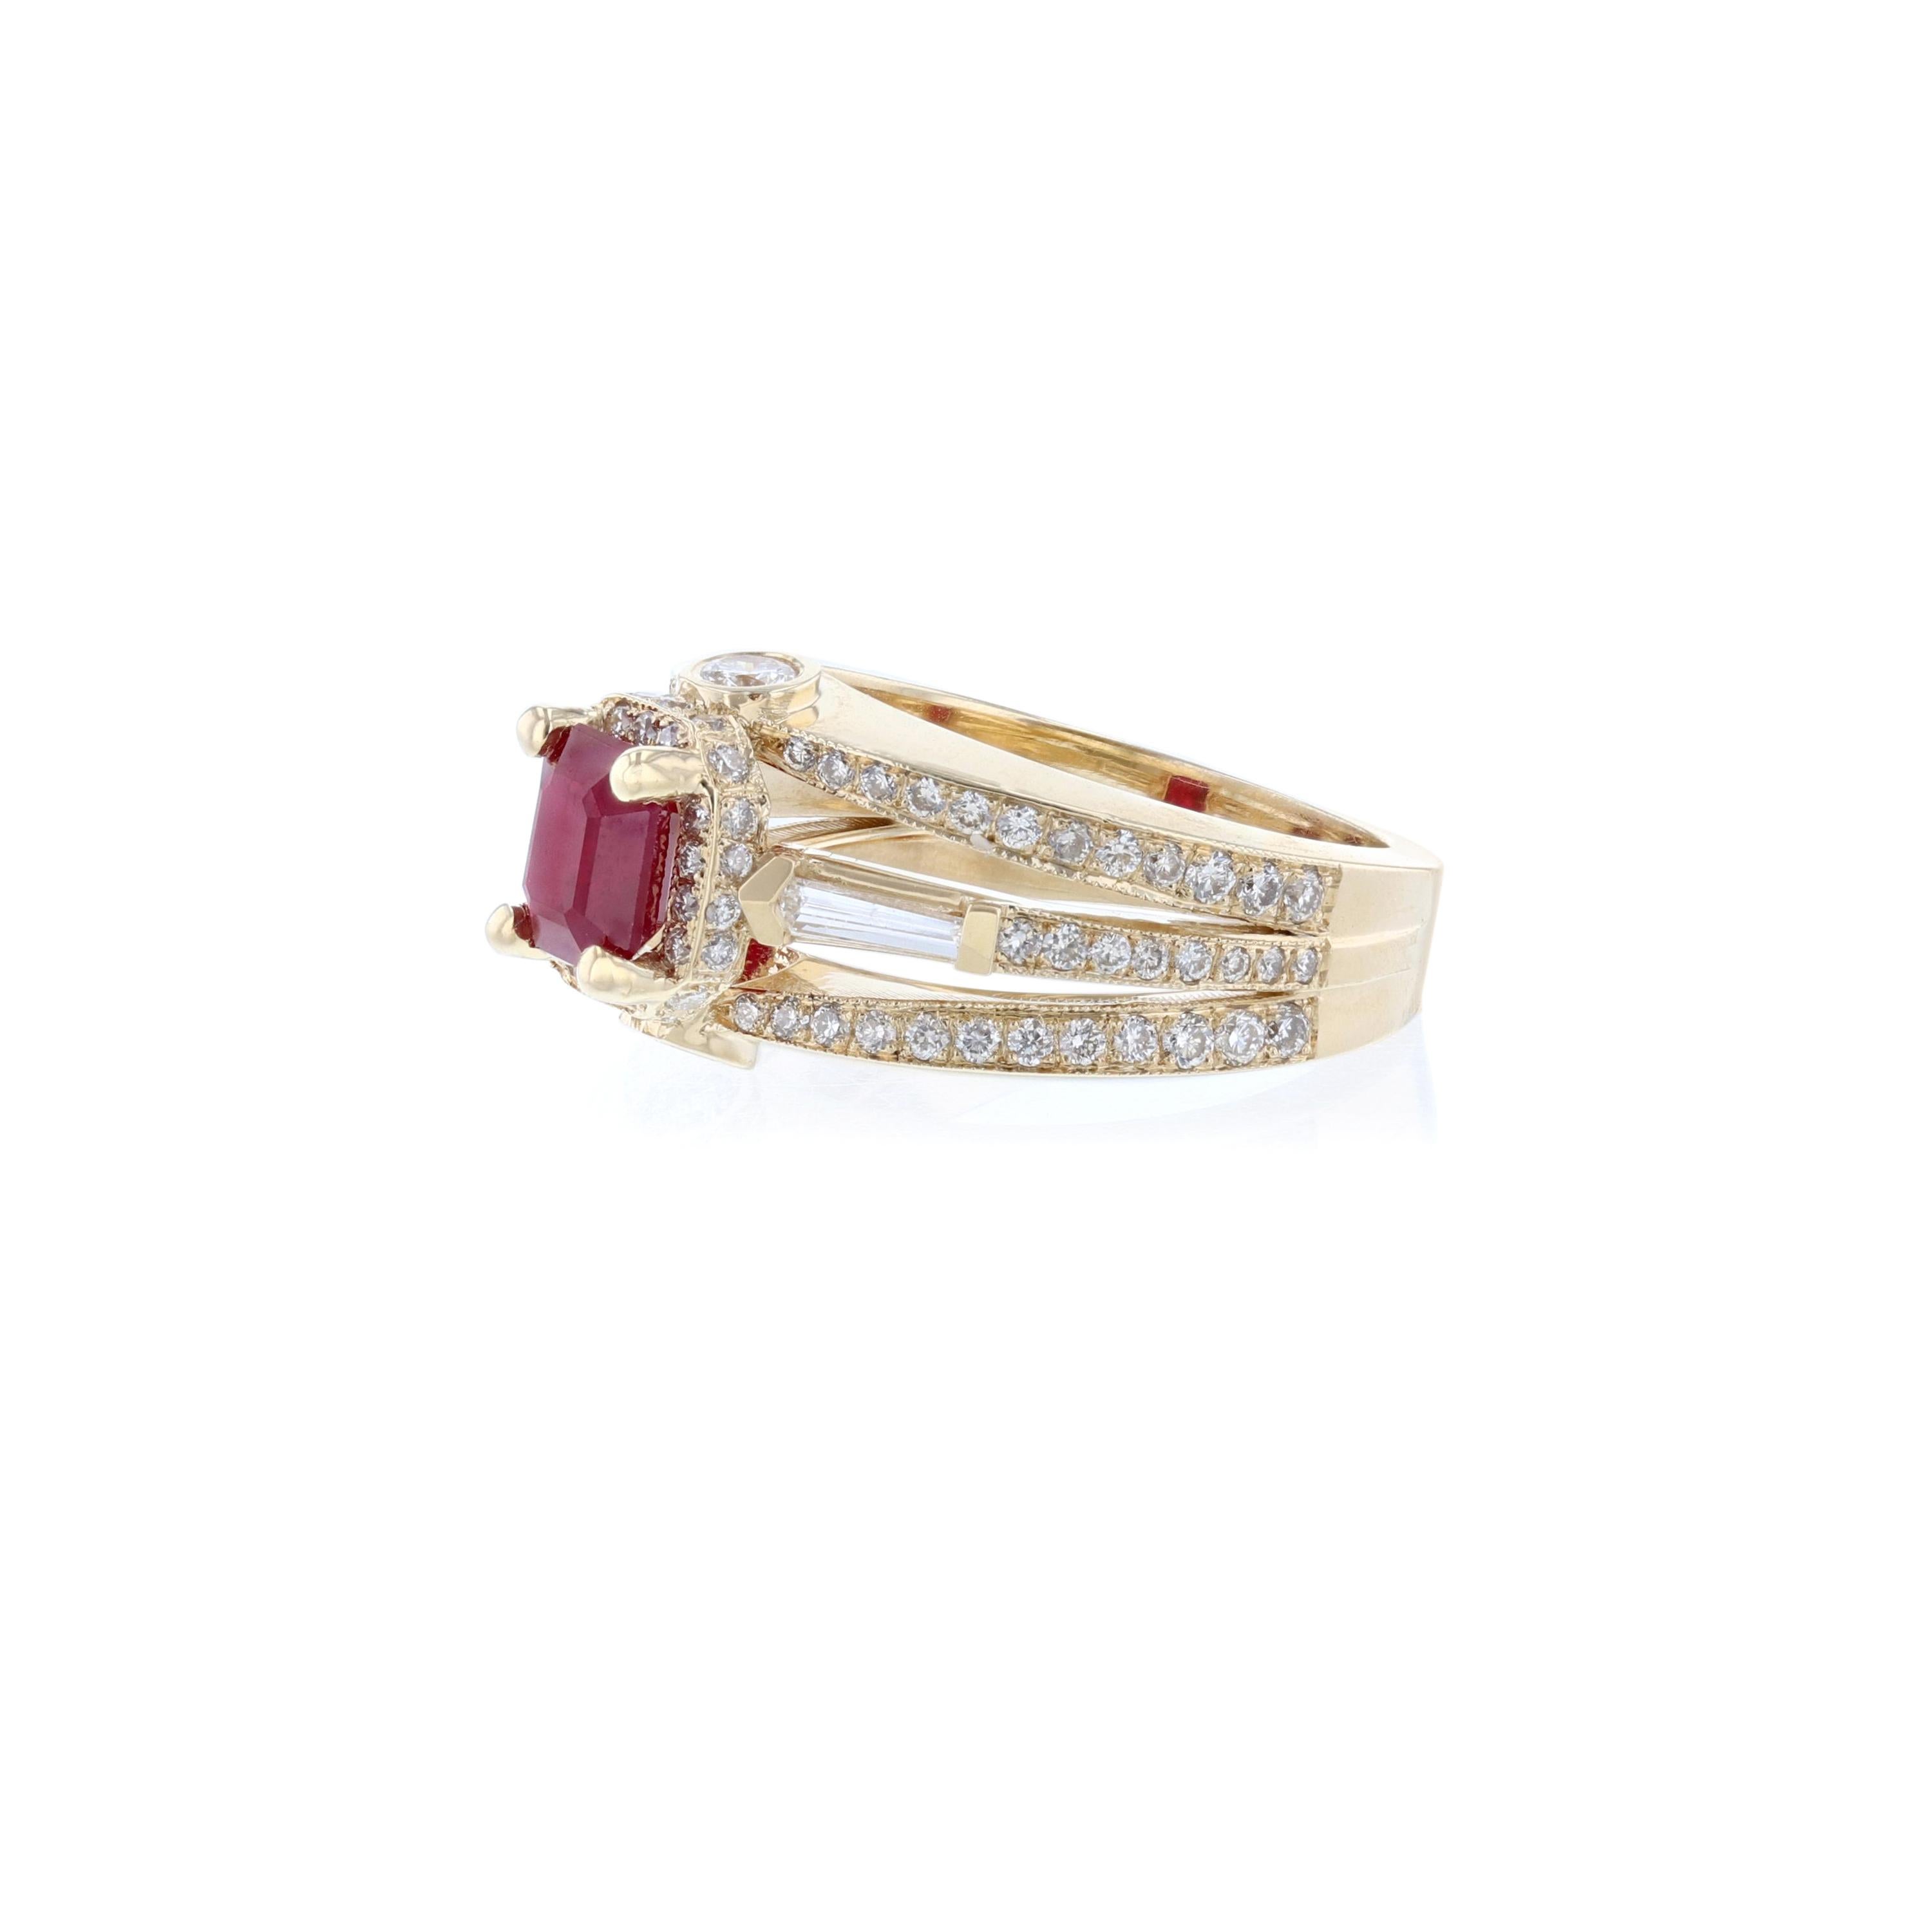 This ring is made in 14K yellow gold and features 1 asscher cut ruby weighing 1.30 carats. It also features 2 baguette cut diamond accents weighing 0.16 carat. Surrounded by 100 round cut diamonds weighing 0.91 carat. With a color grade (H) and